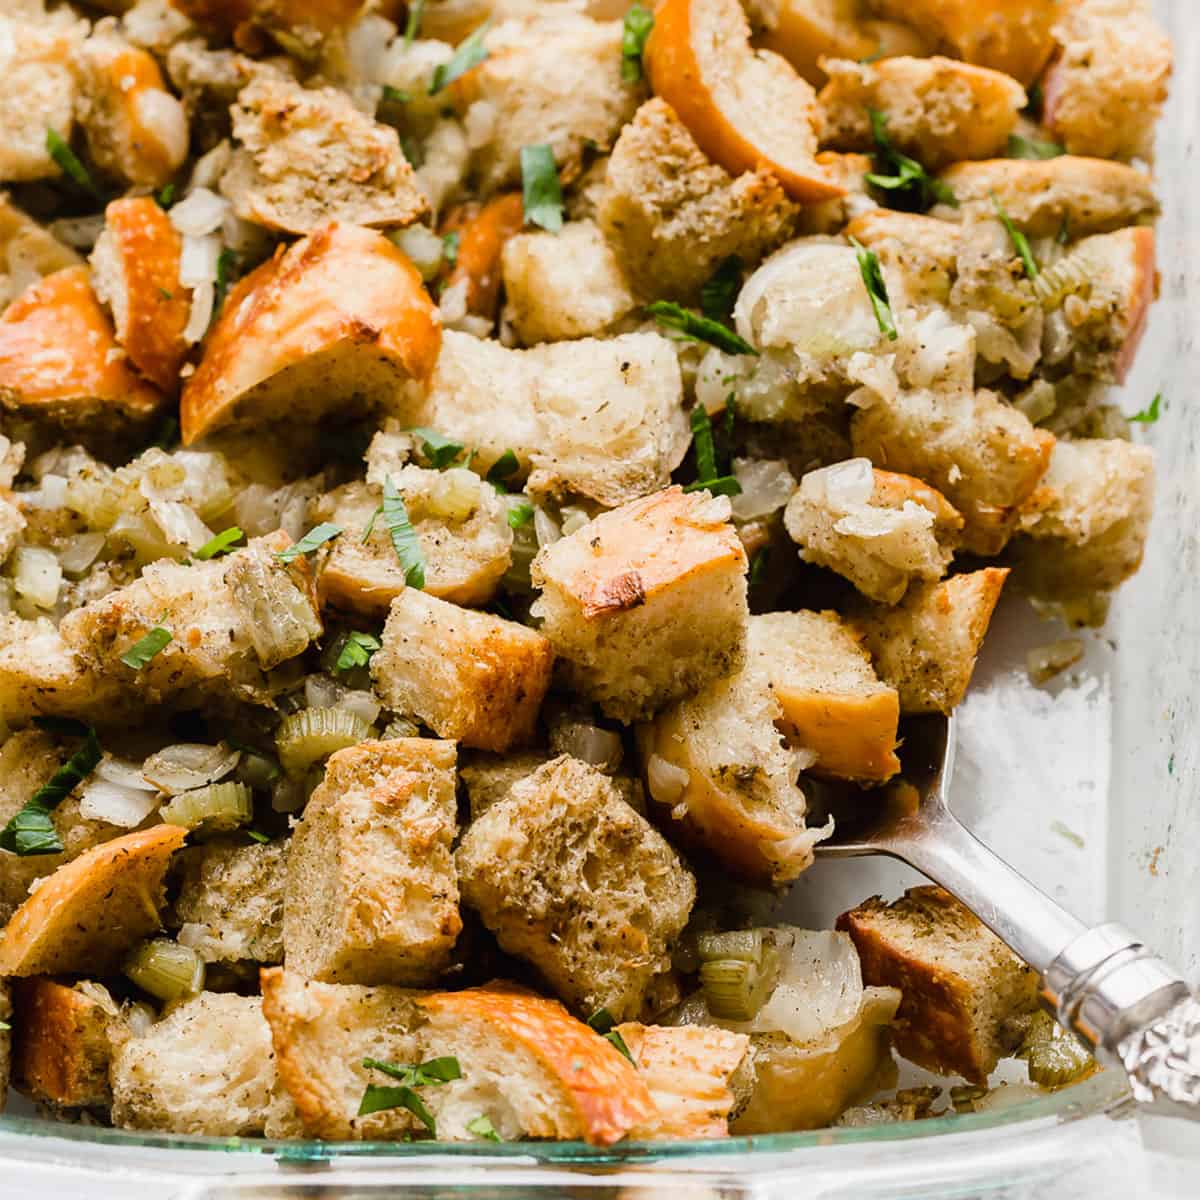 A close up photo of golden baked Thanksgiving Stuffing Recipe. in a baking dish.